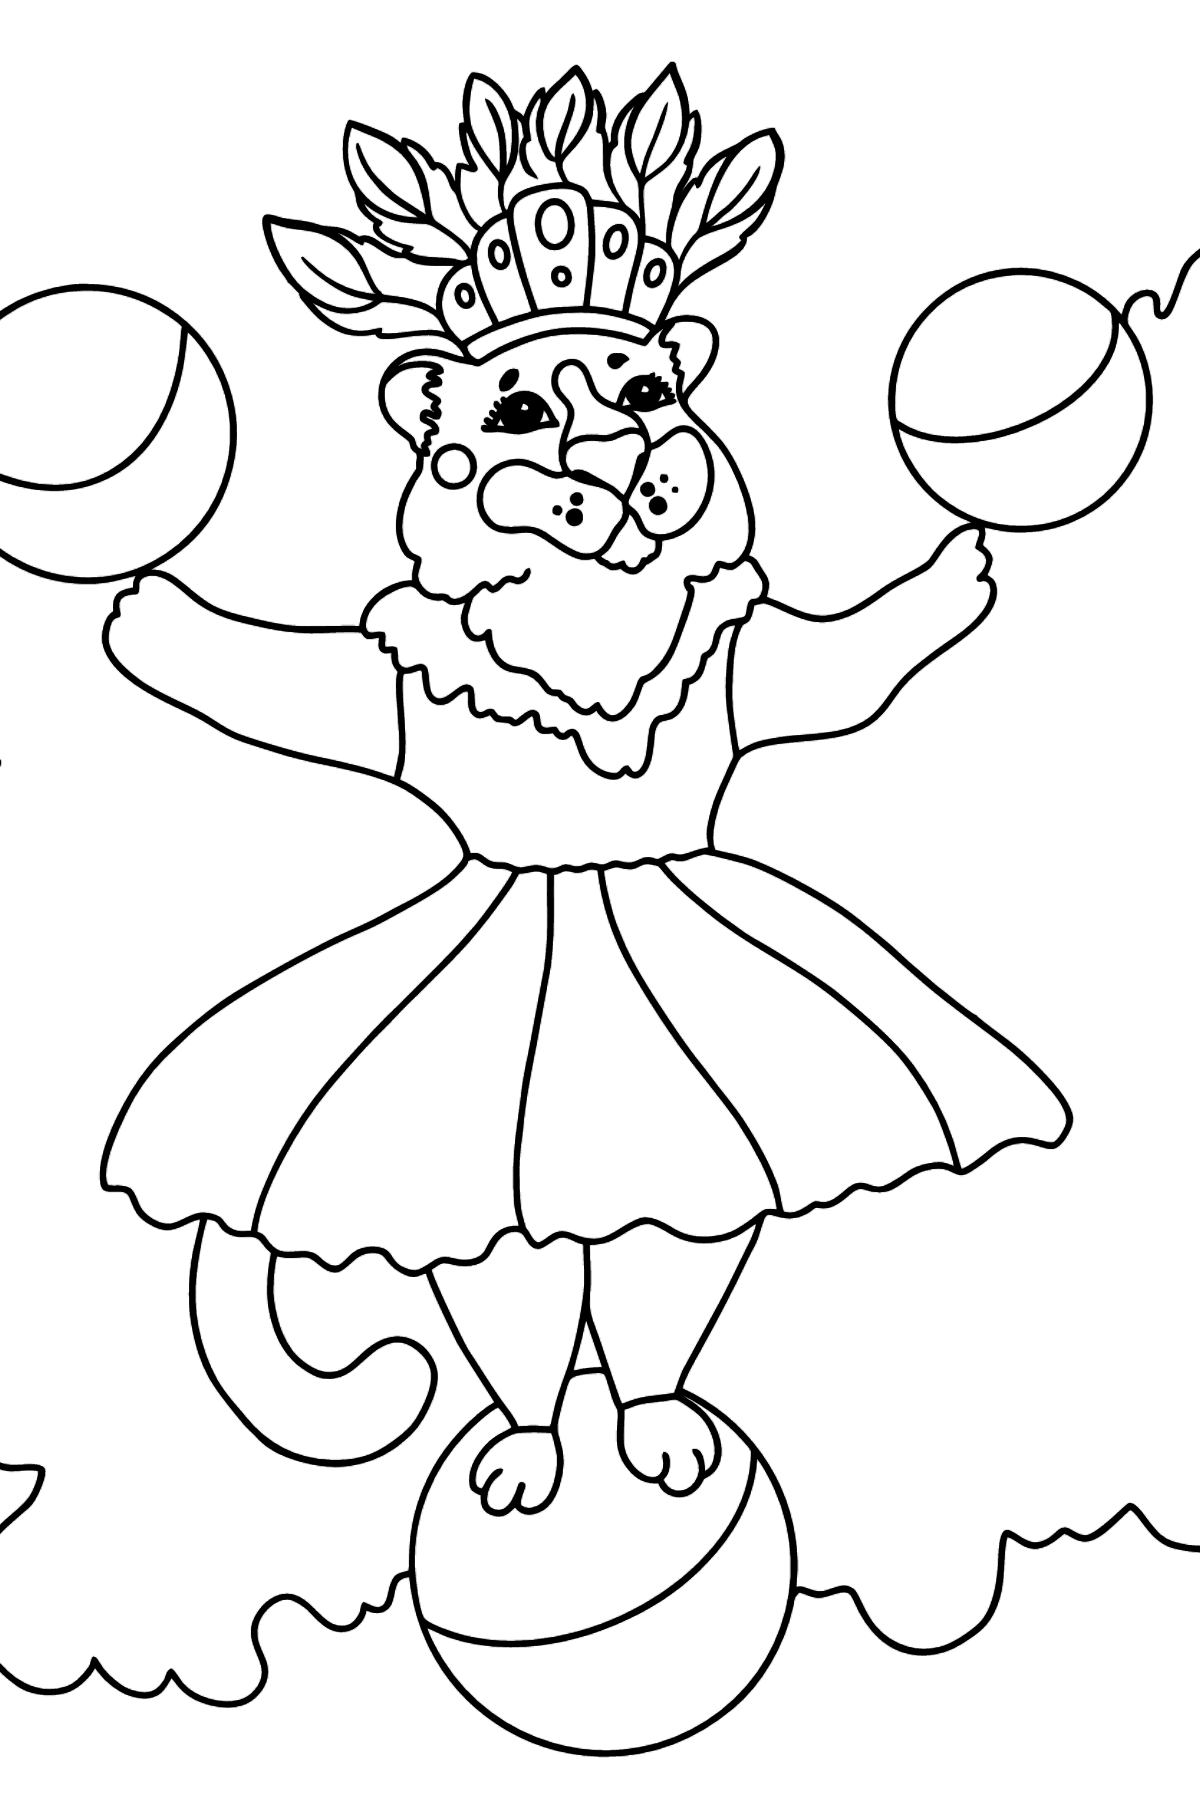 Coloring Page - A Tigress is Juggling Balls - Coloring Pages for Kids